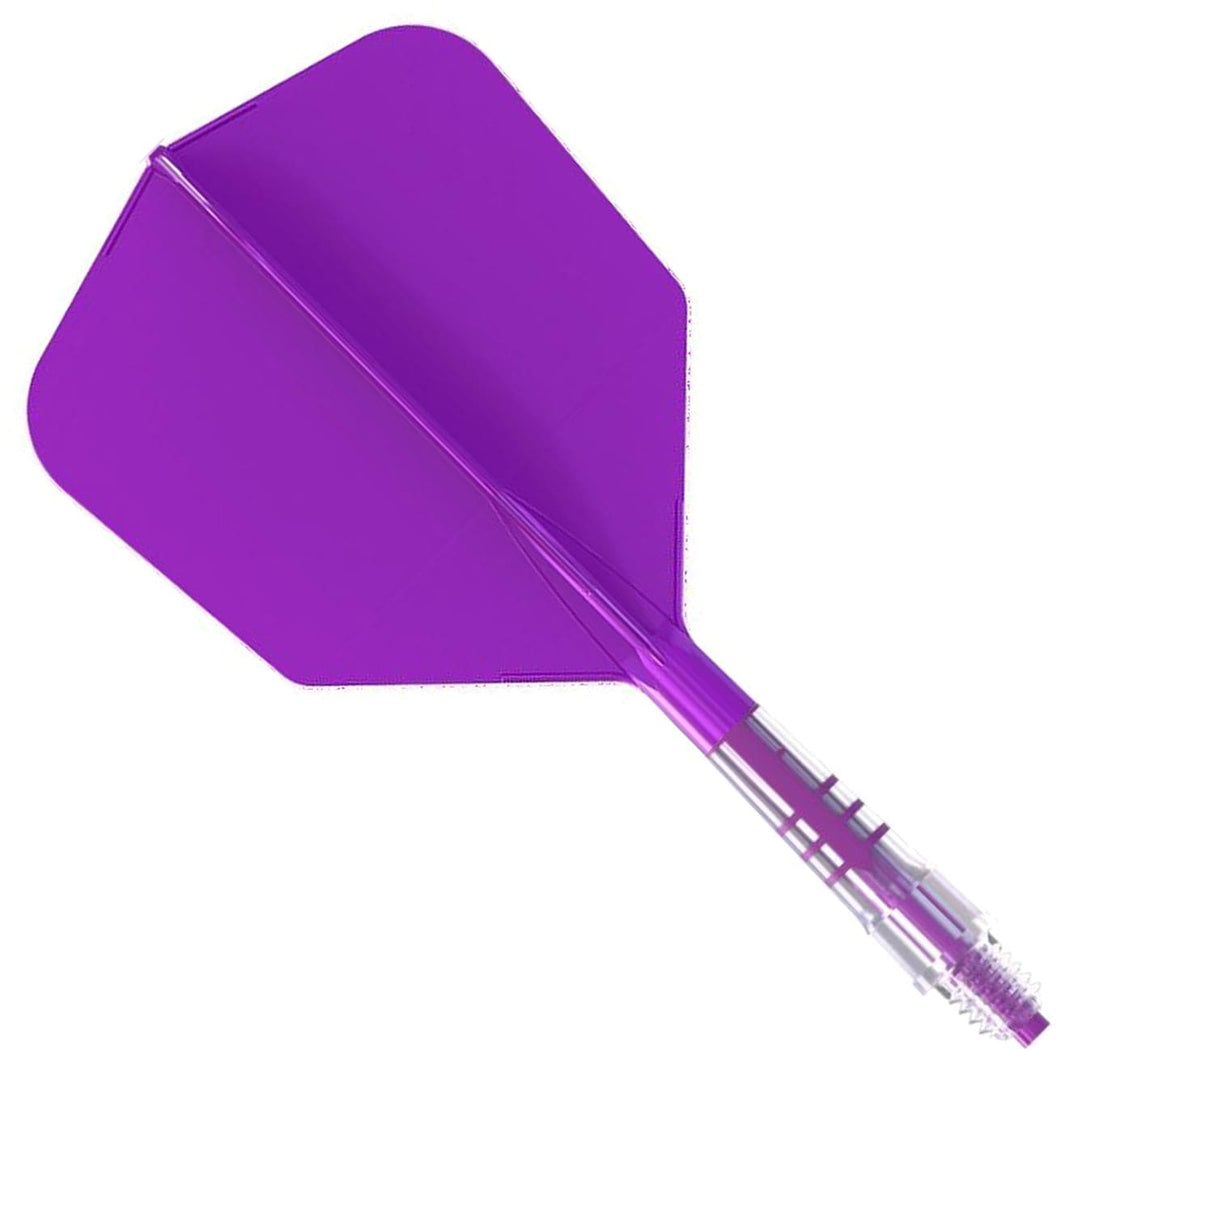 Cuesoul Rost T19 Carbon Fibre - Integrated Dart Shaft and Flights - Big Wing - Purple Size 1